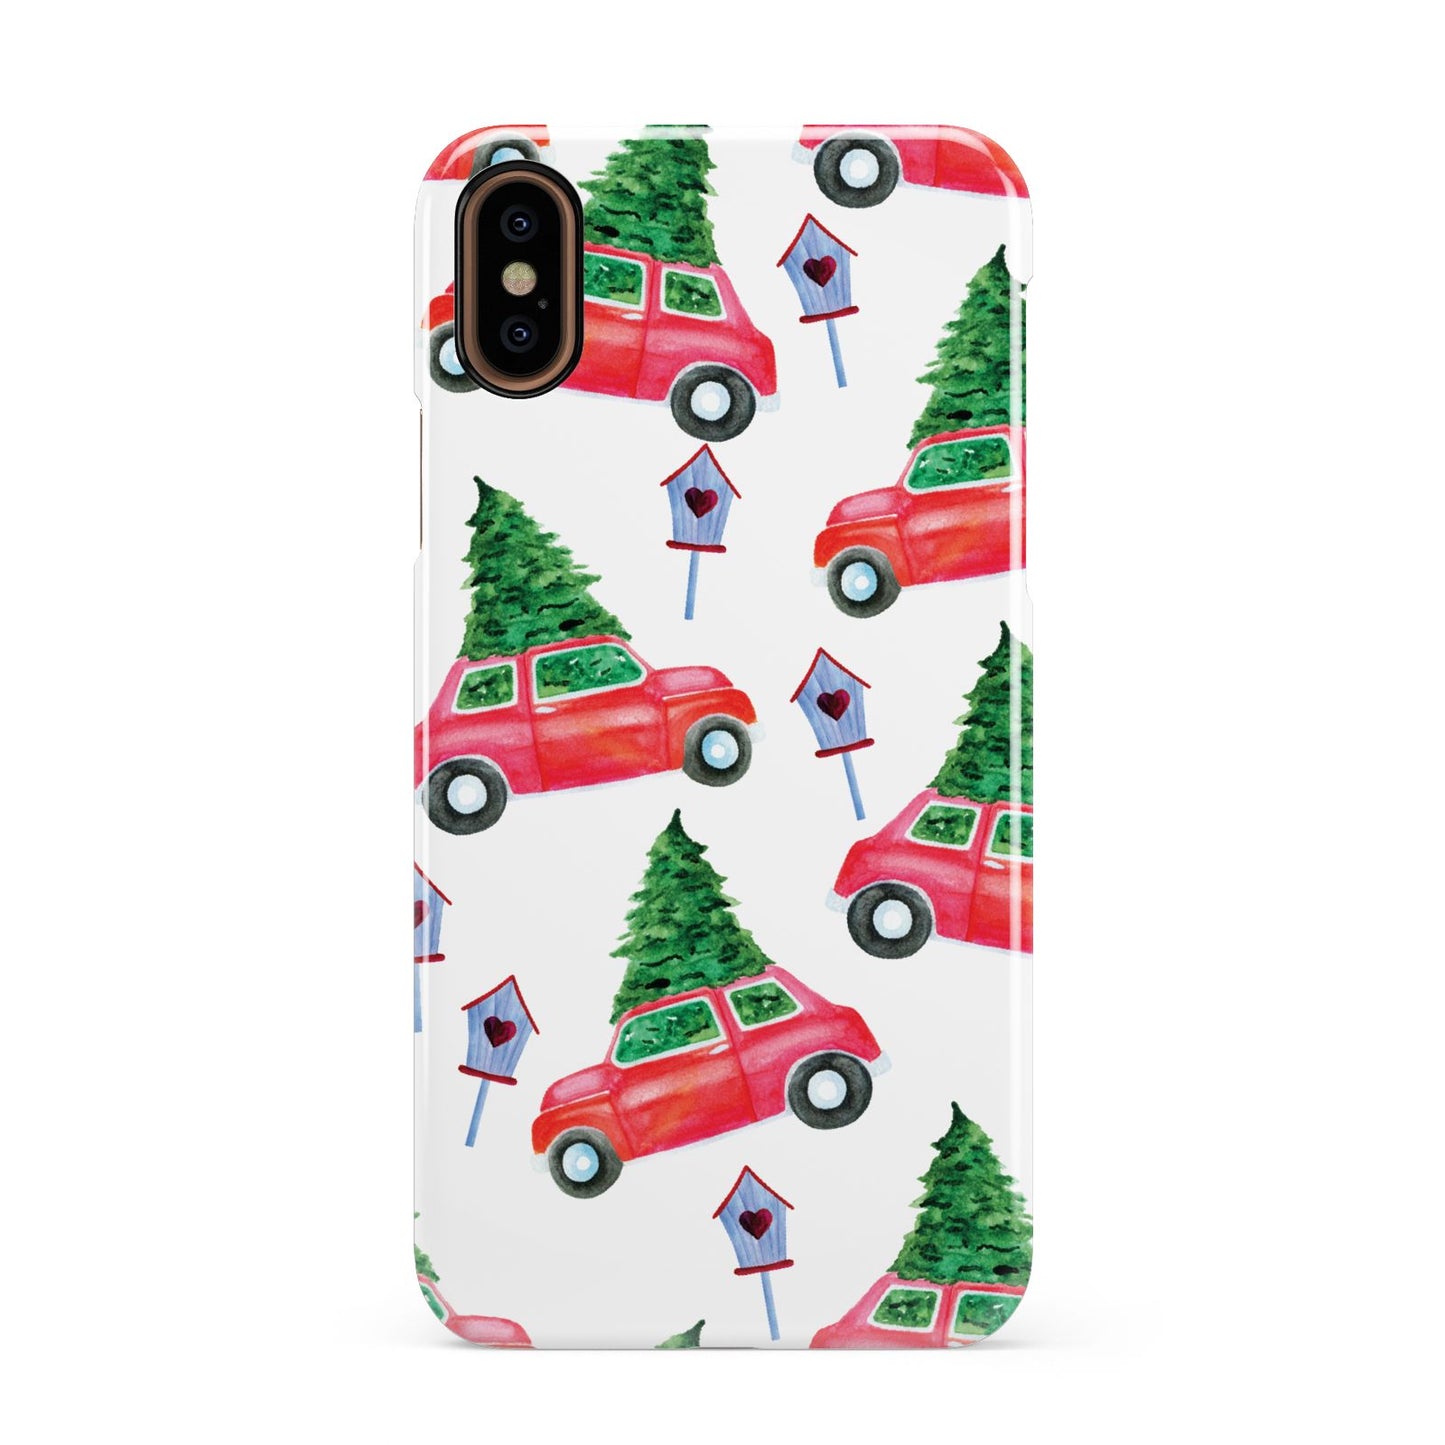 Driving home for Christmas Apple iPhone XS 3D Snap Case